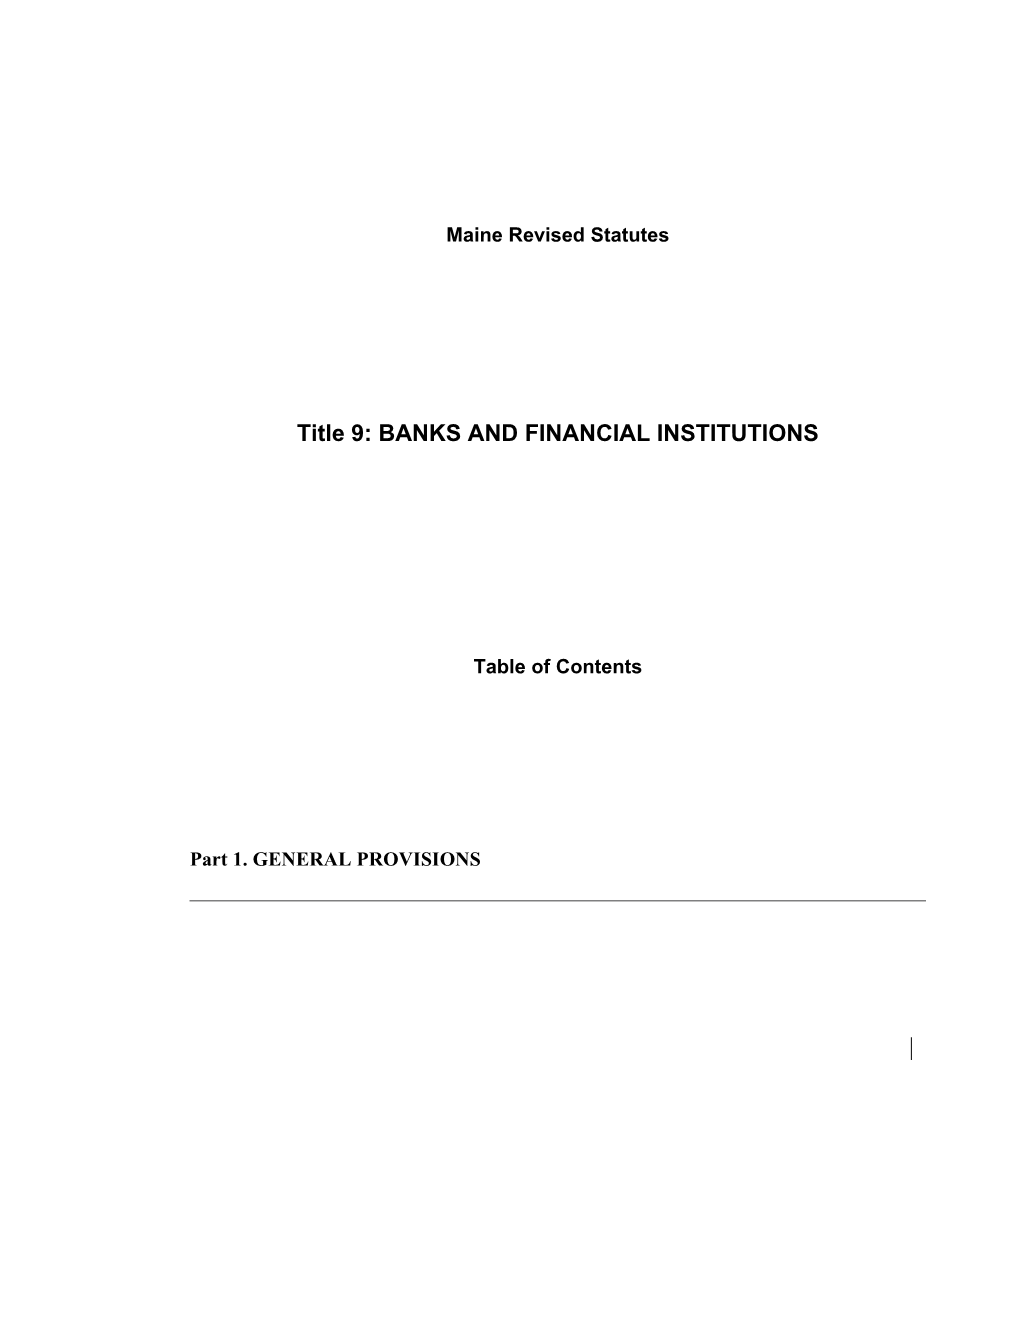 MRS Title 9: BANKS and FINANCIAL INSTITUTIONS